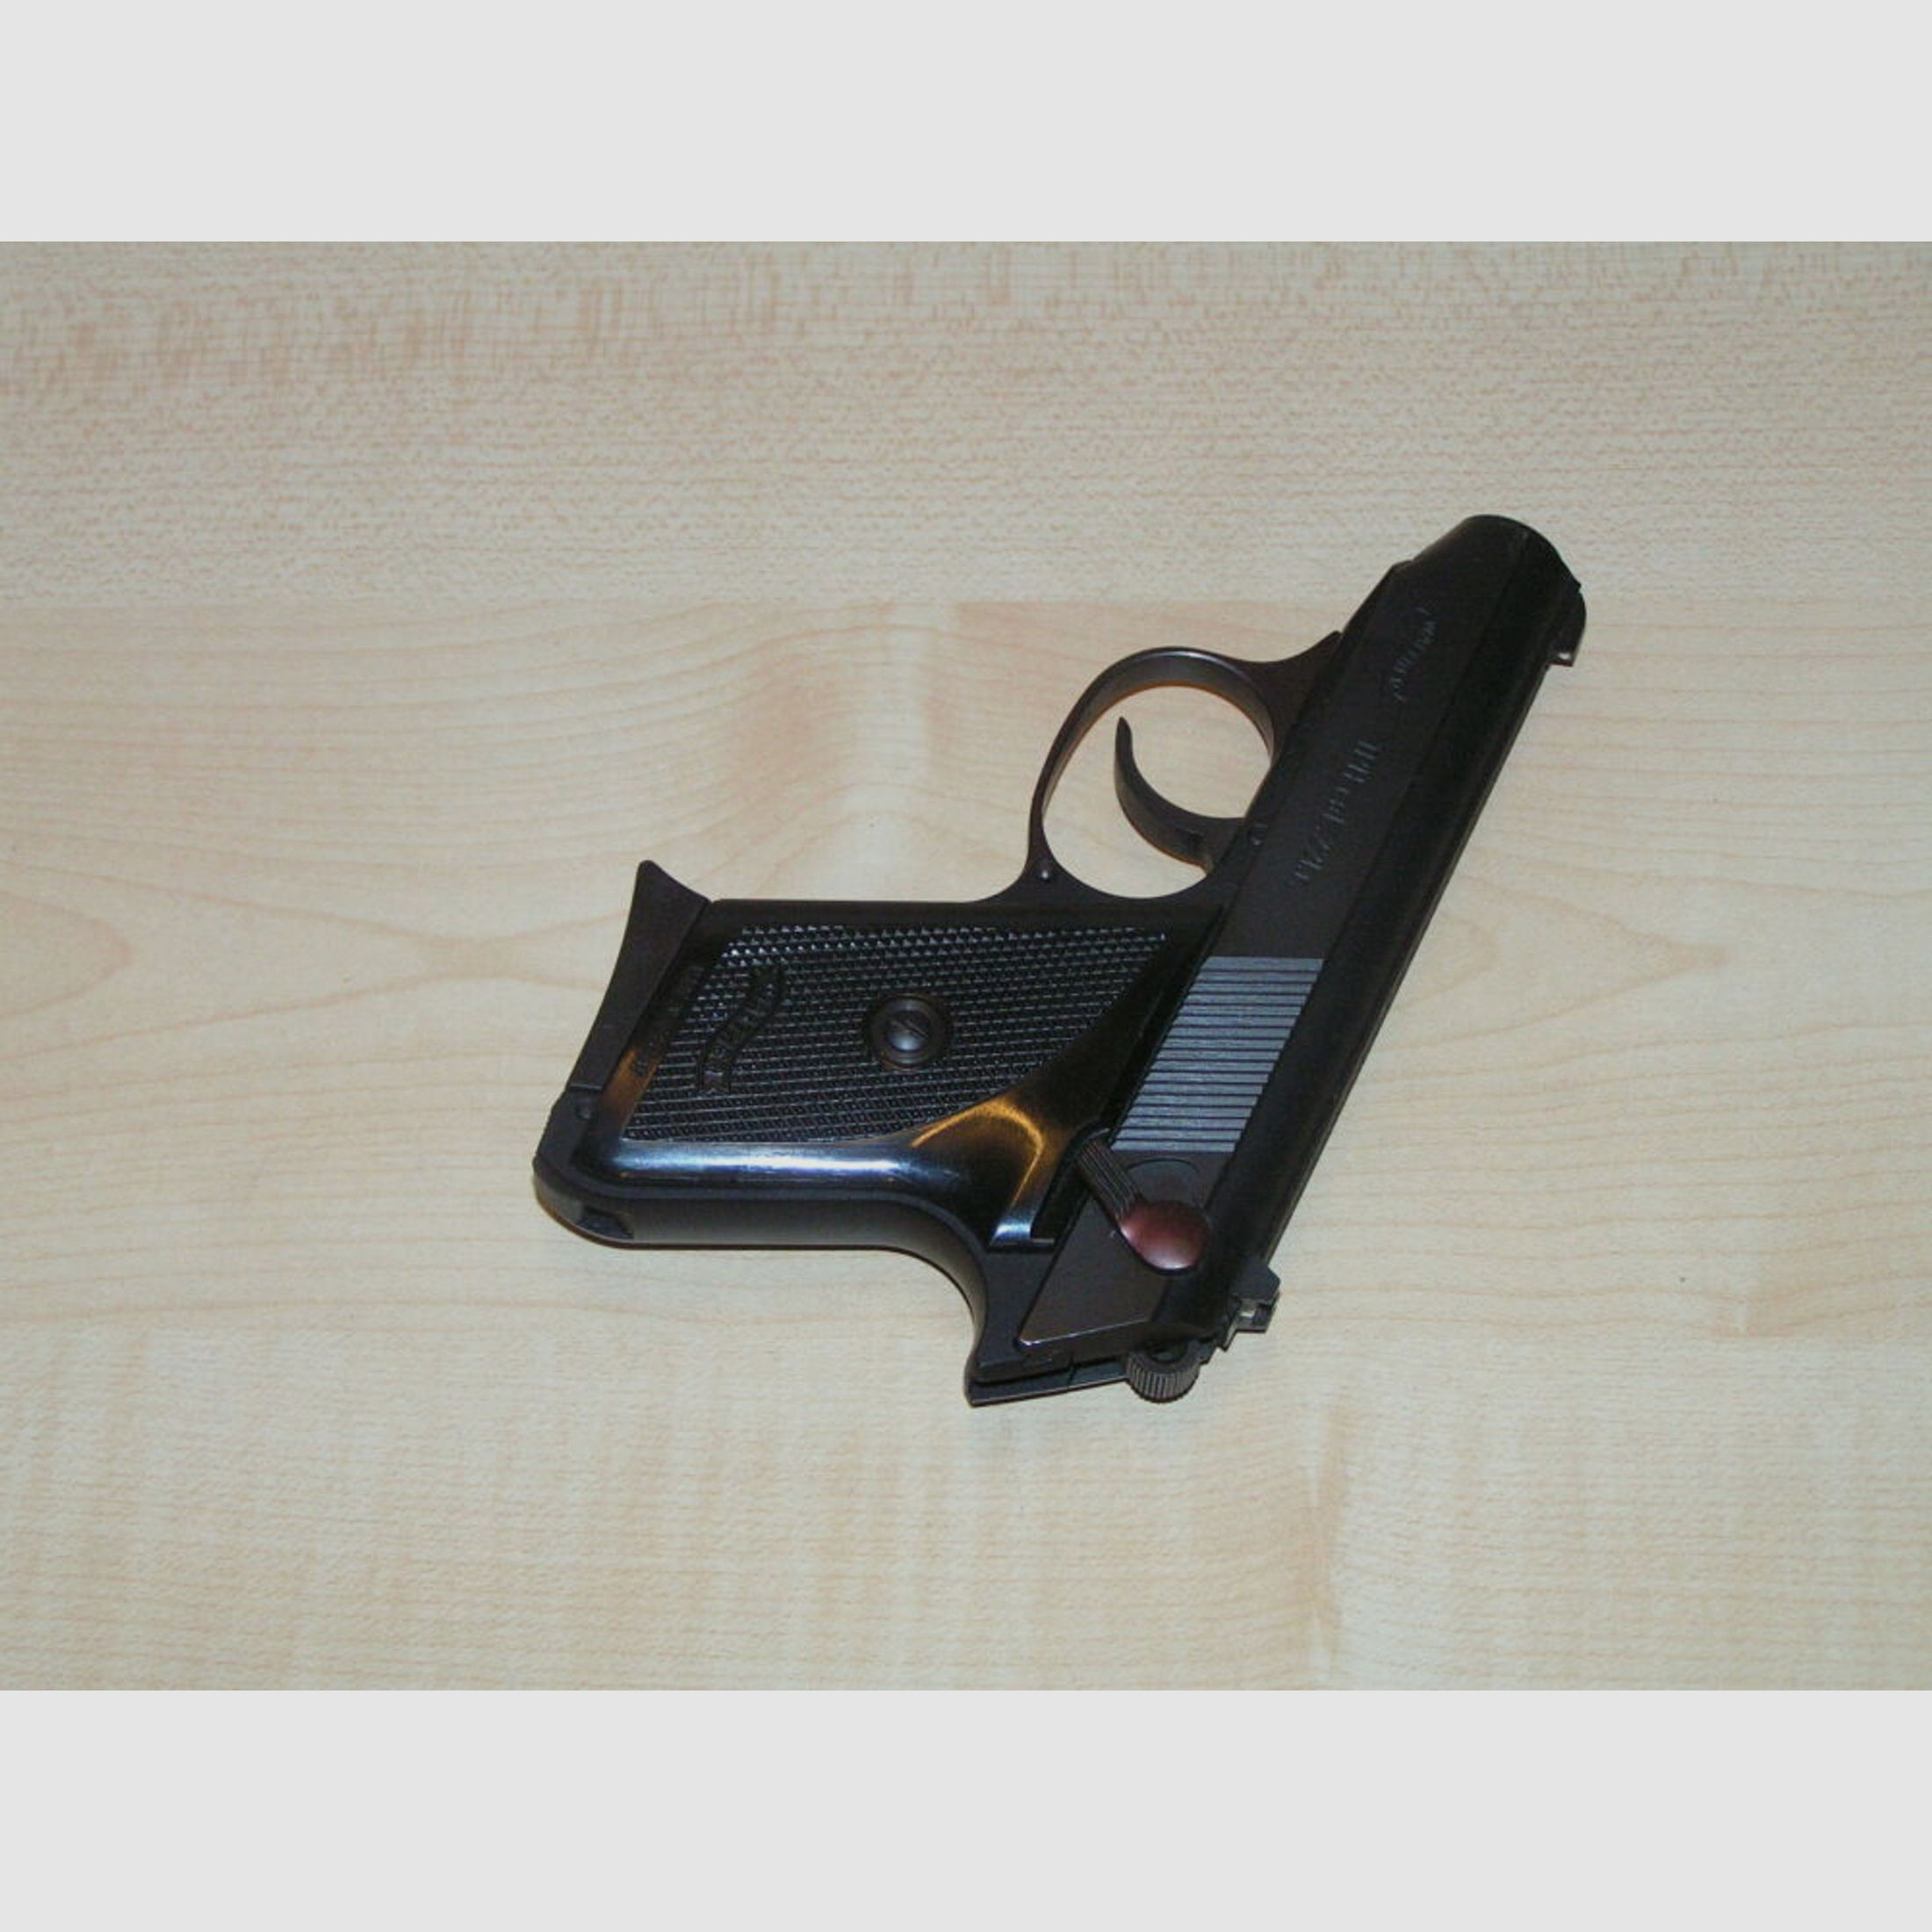 Walther	 TPH